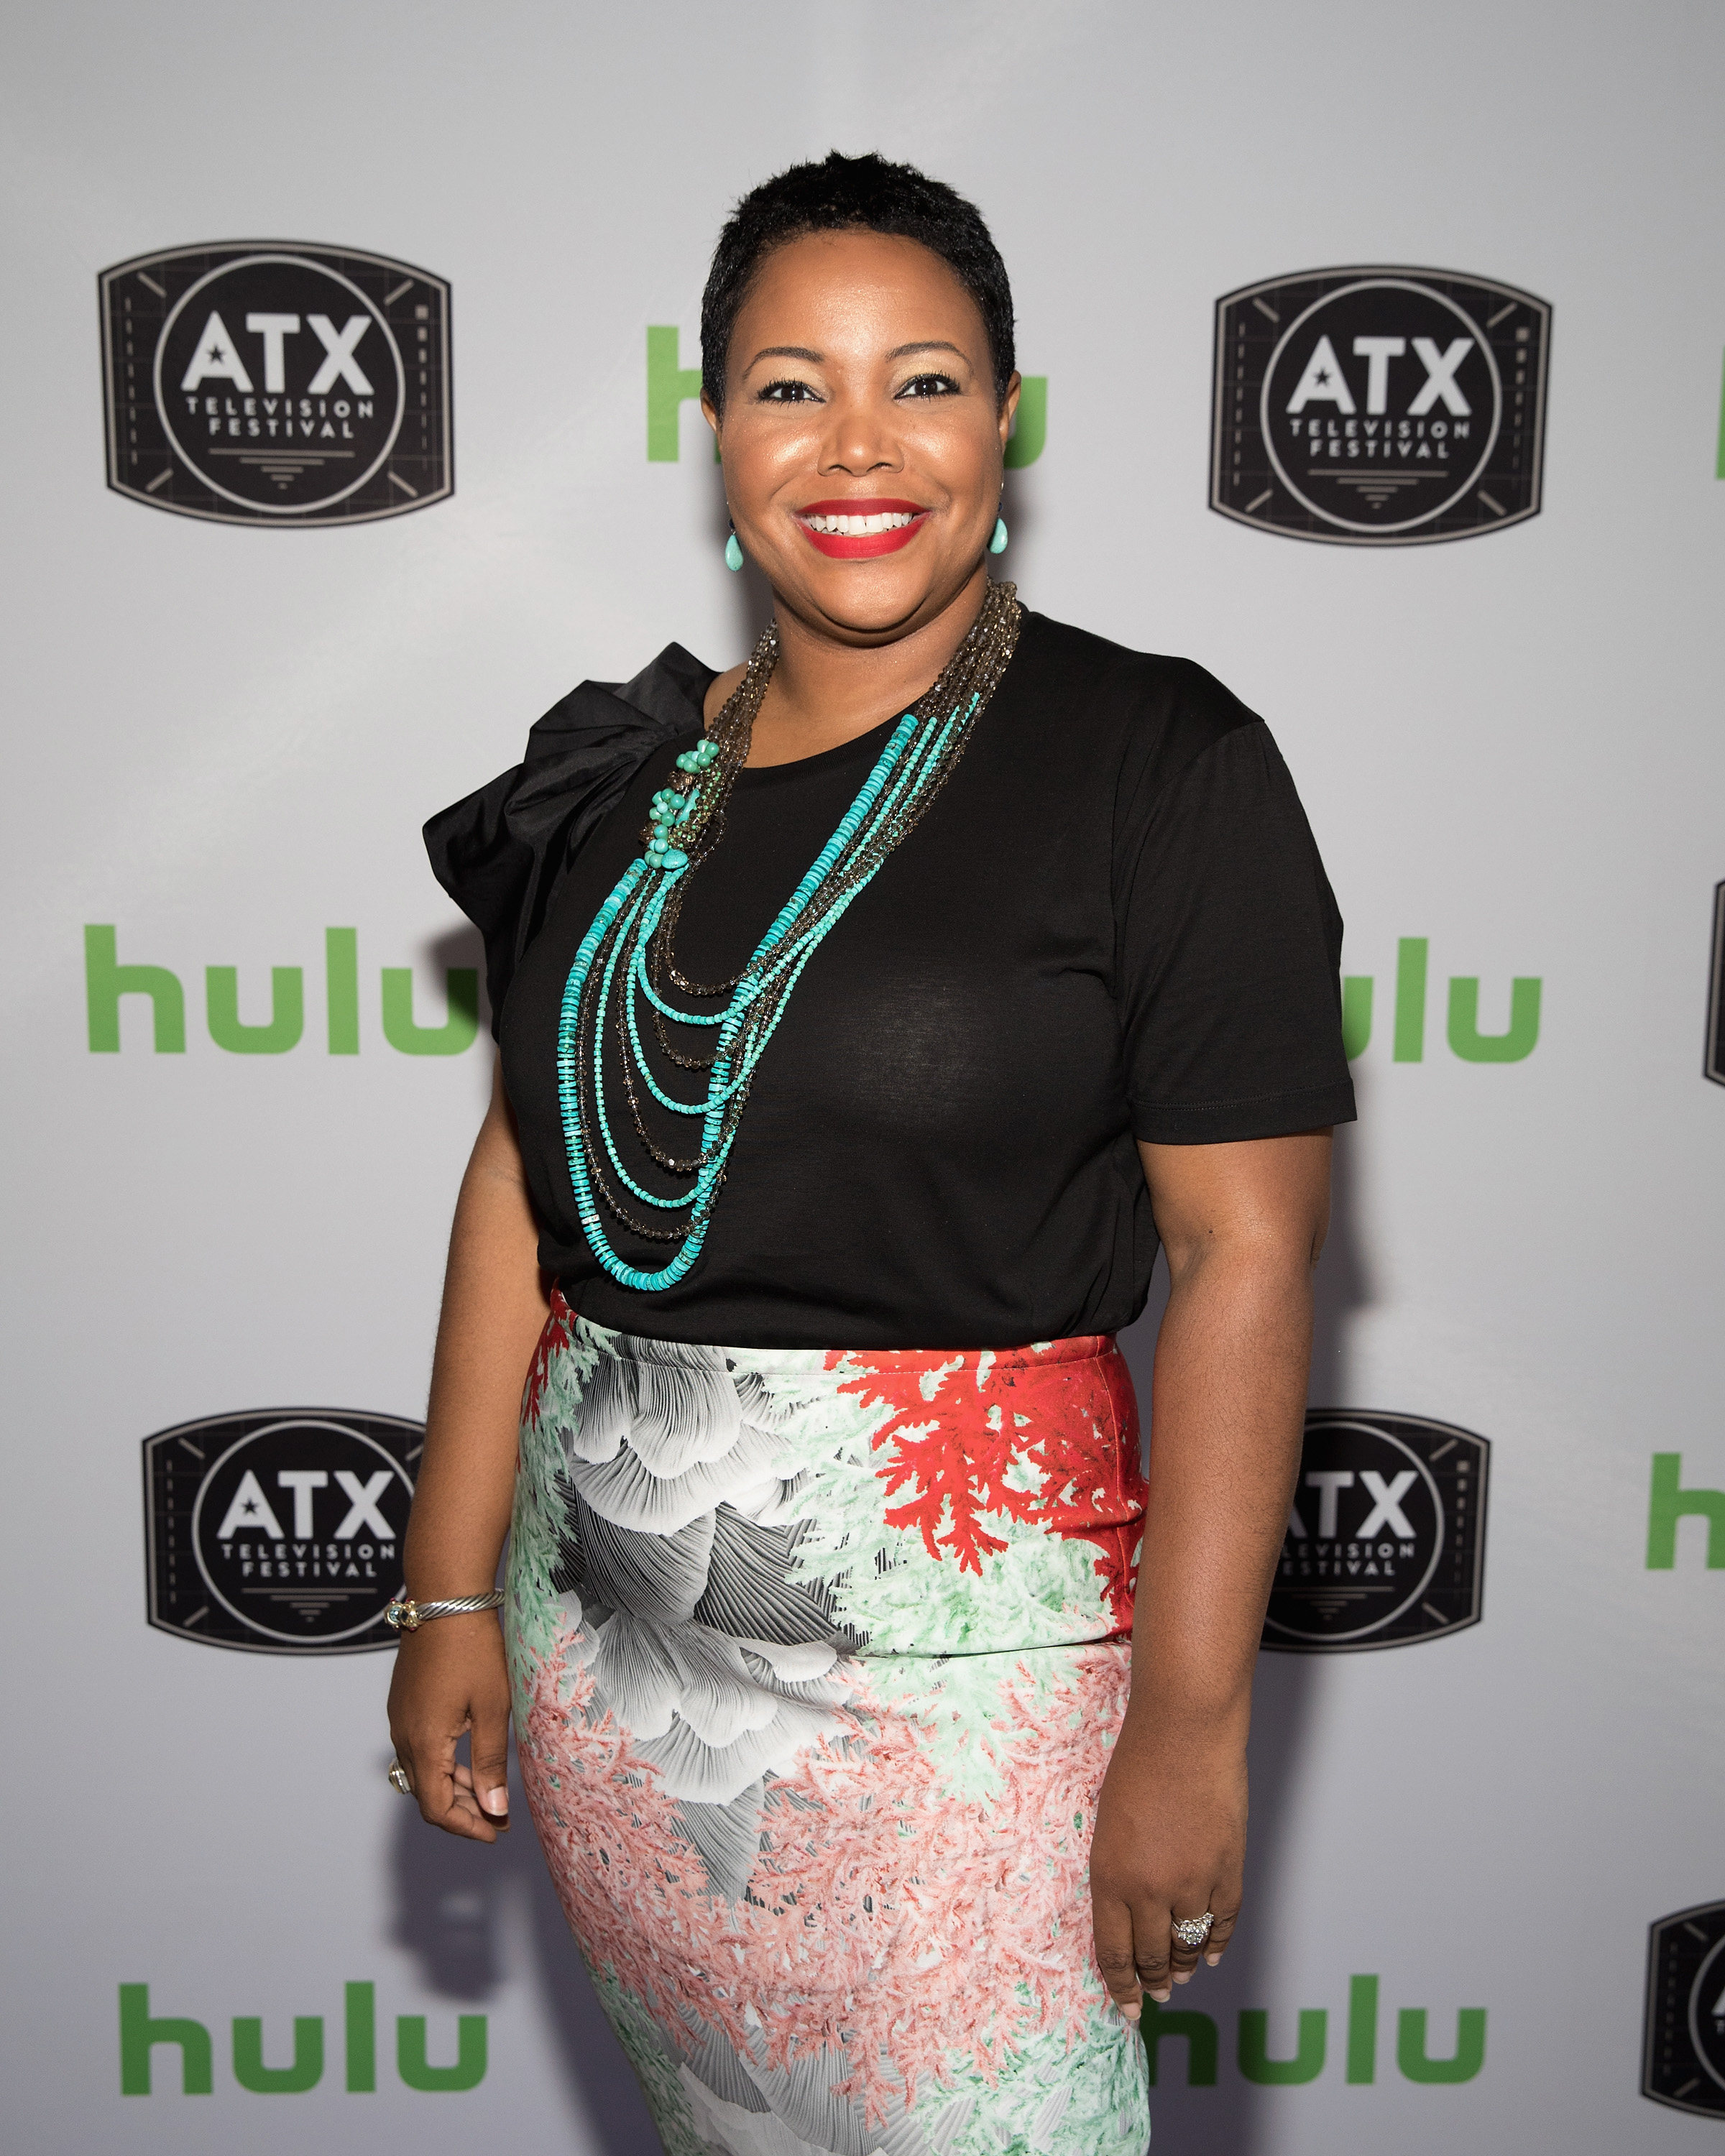 Kellie Shanygne Williams visits the Hulu Badgeholder Lounge during the ATX Television Festival at the InterContinental Stephen F. Austin on June 8, 2018 in Austin, Texas. | Source: Getty Images